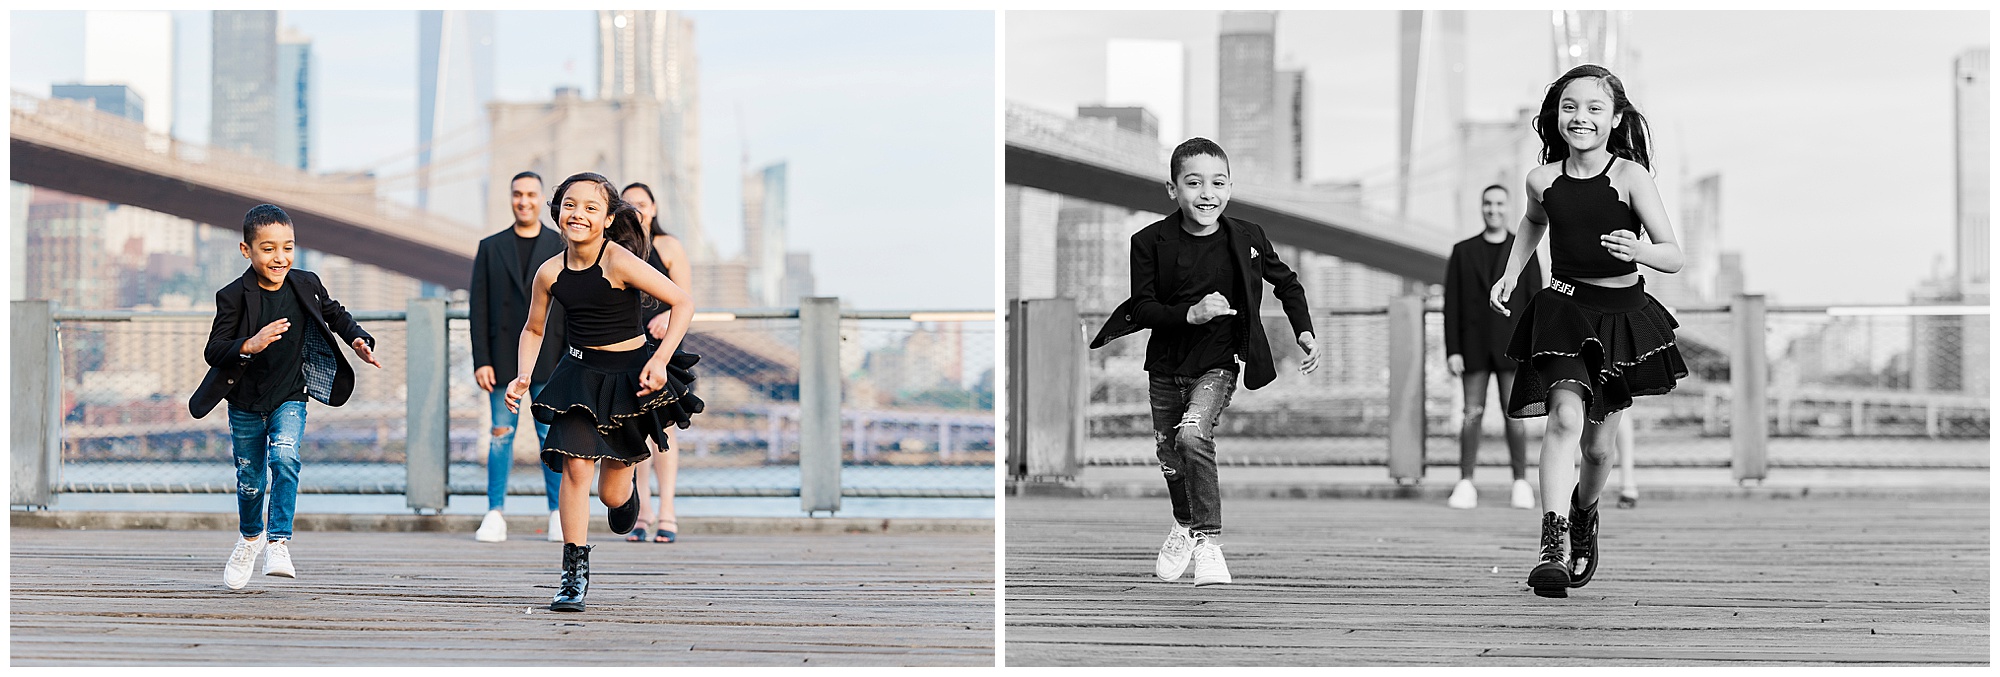 Unique family photo shoot in Brooklyn